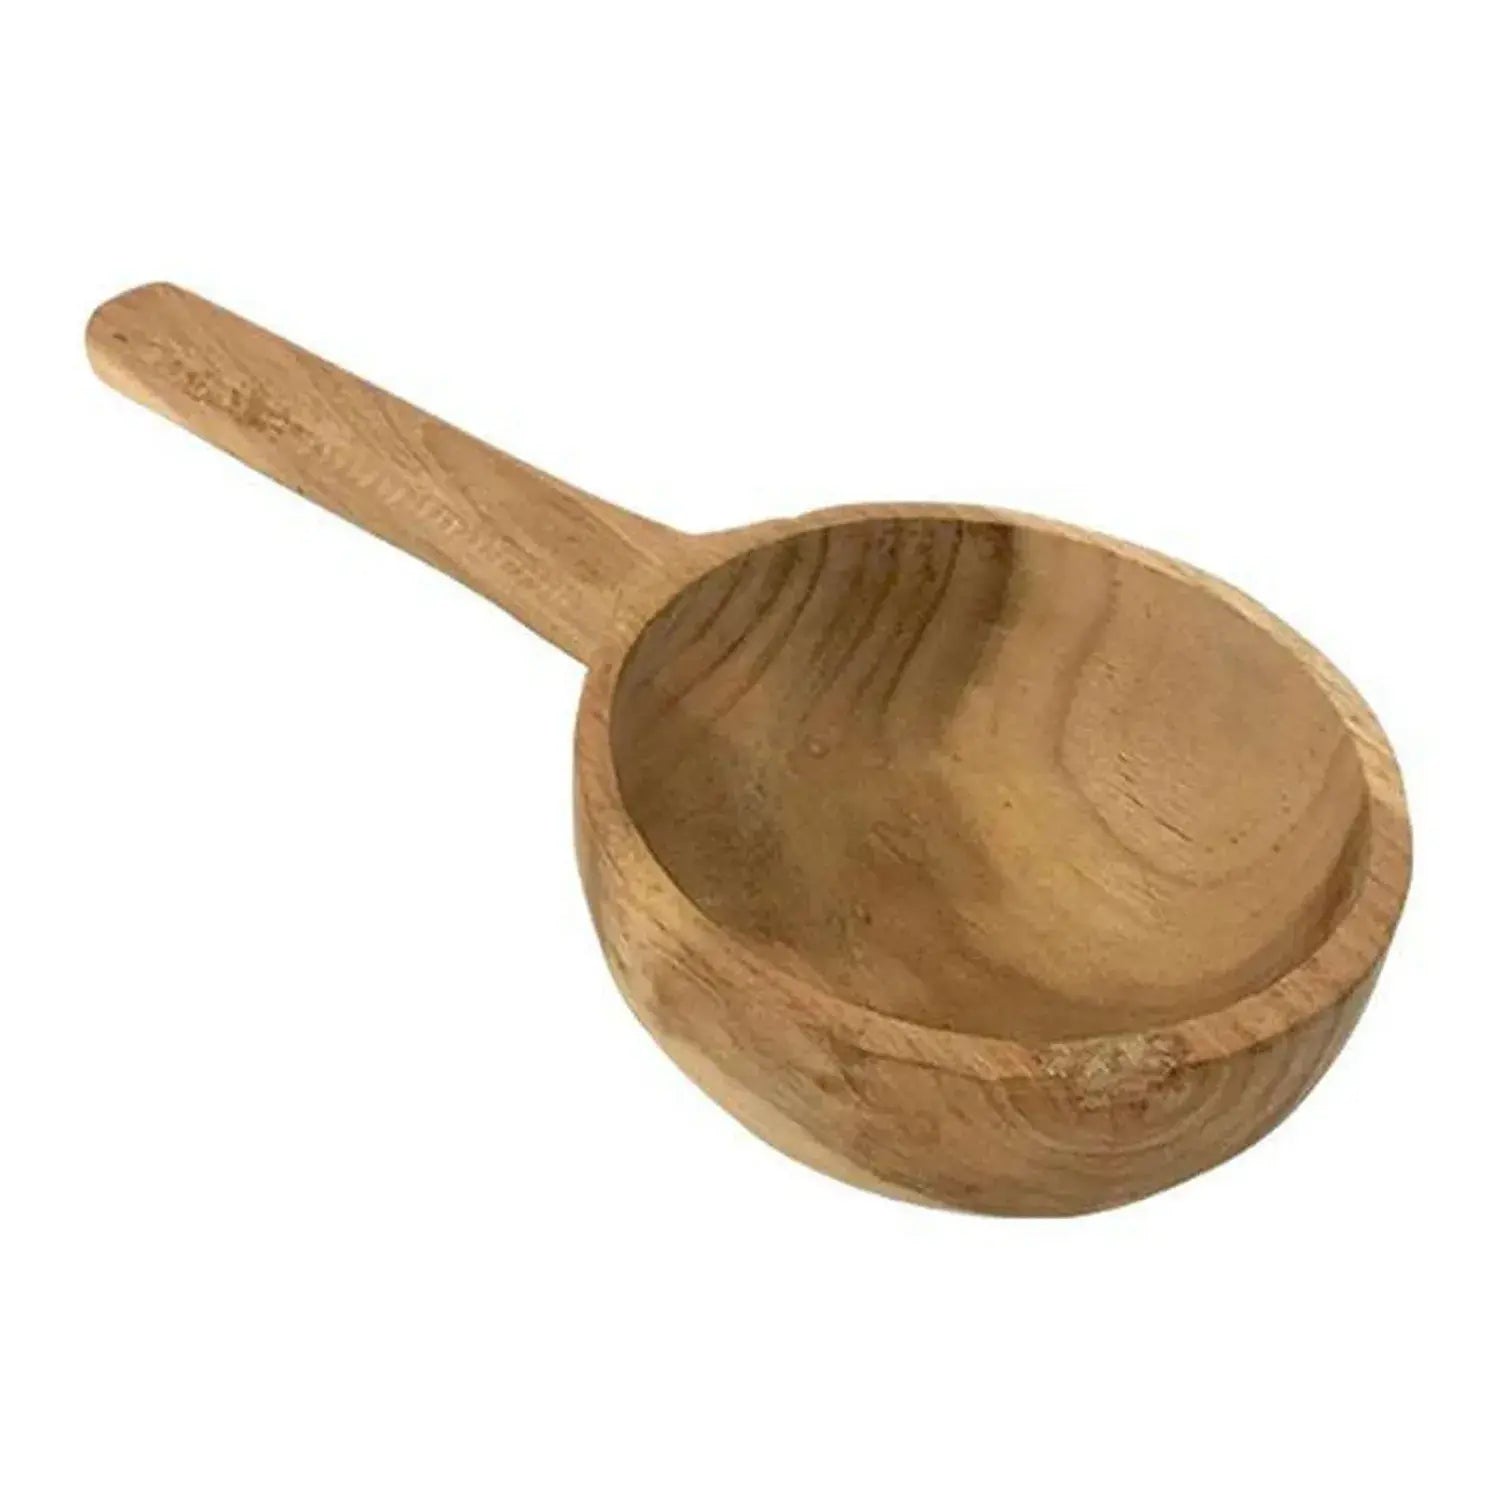 Traditional Teak Water Scoop by Papoose Toys for Sensory &amp; Water Play